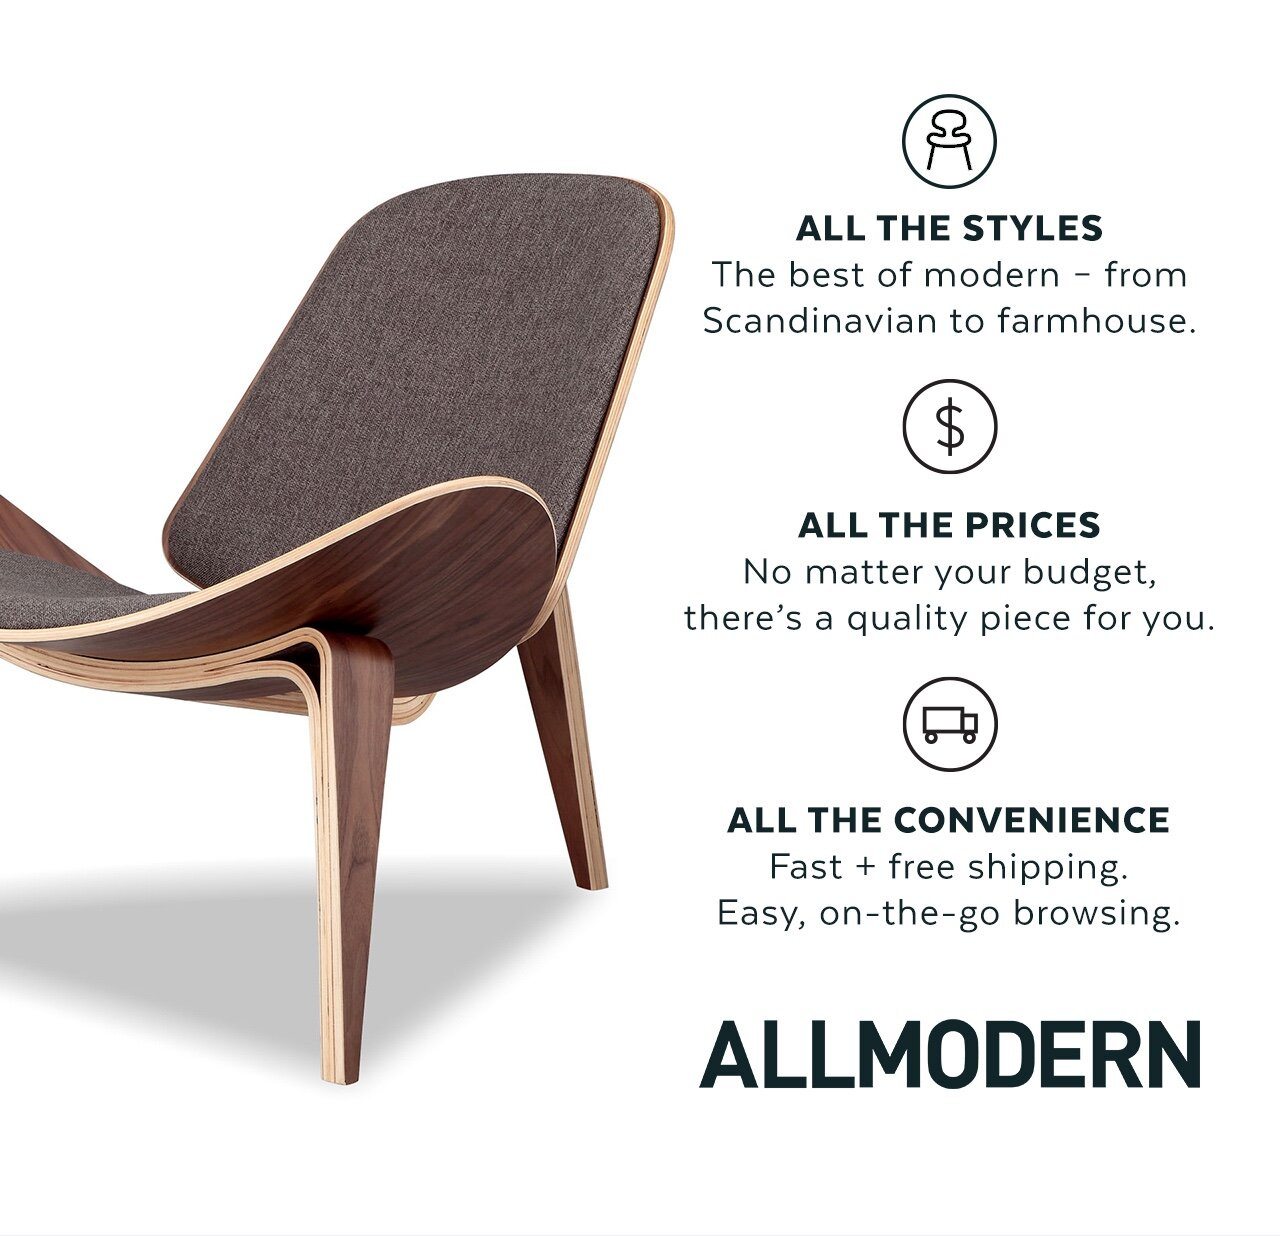 AllModern: All the Styles, All the Prices, All the Convenience